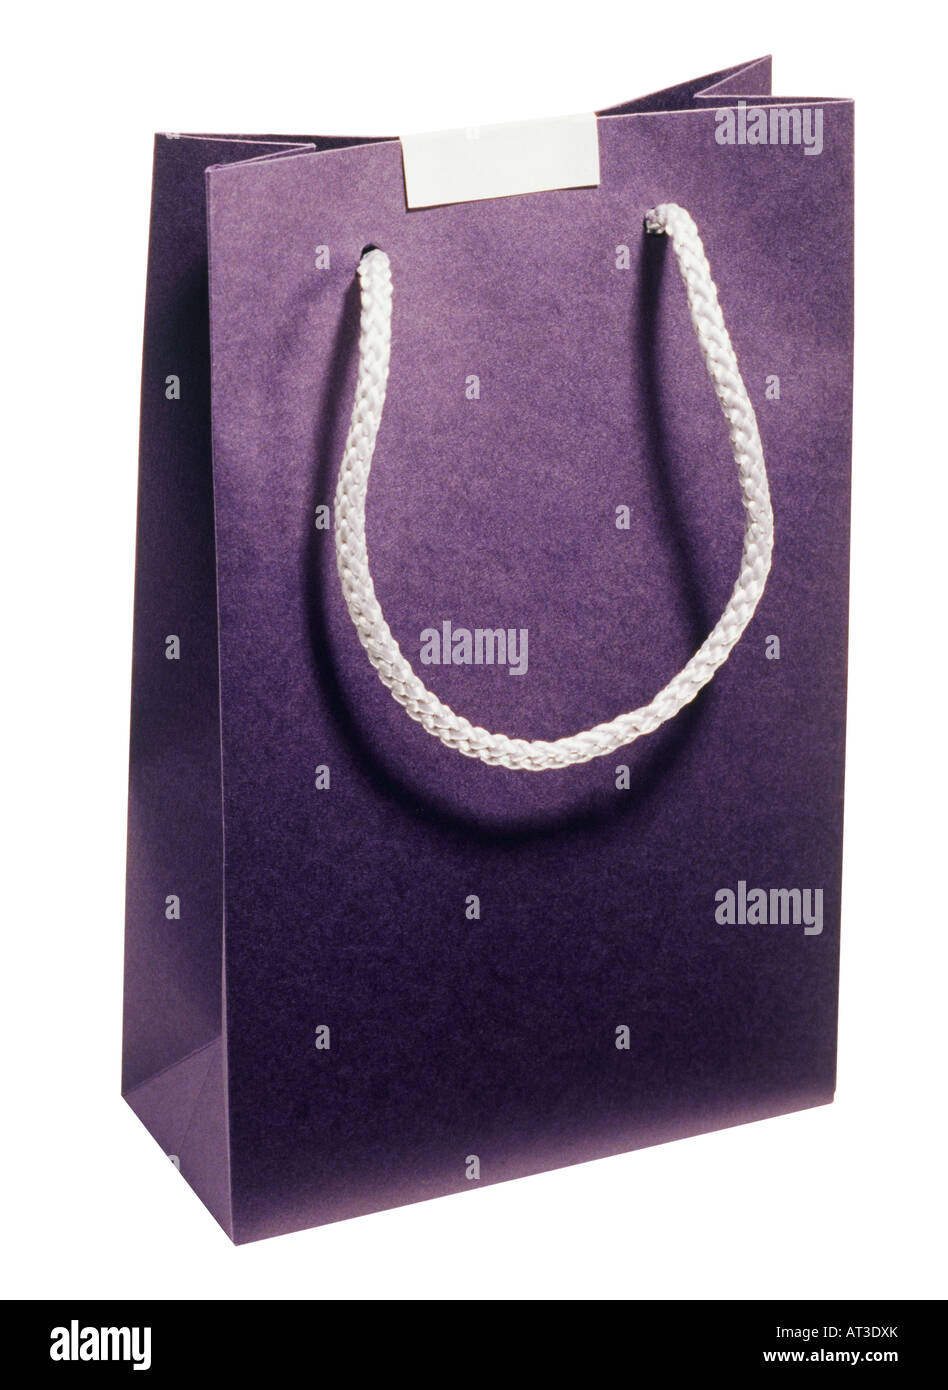 A purple gift/carrier bag Stock Photo